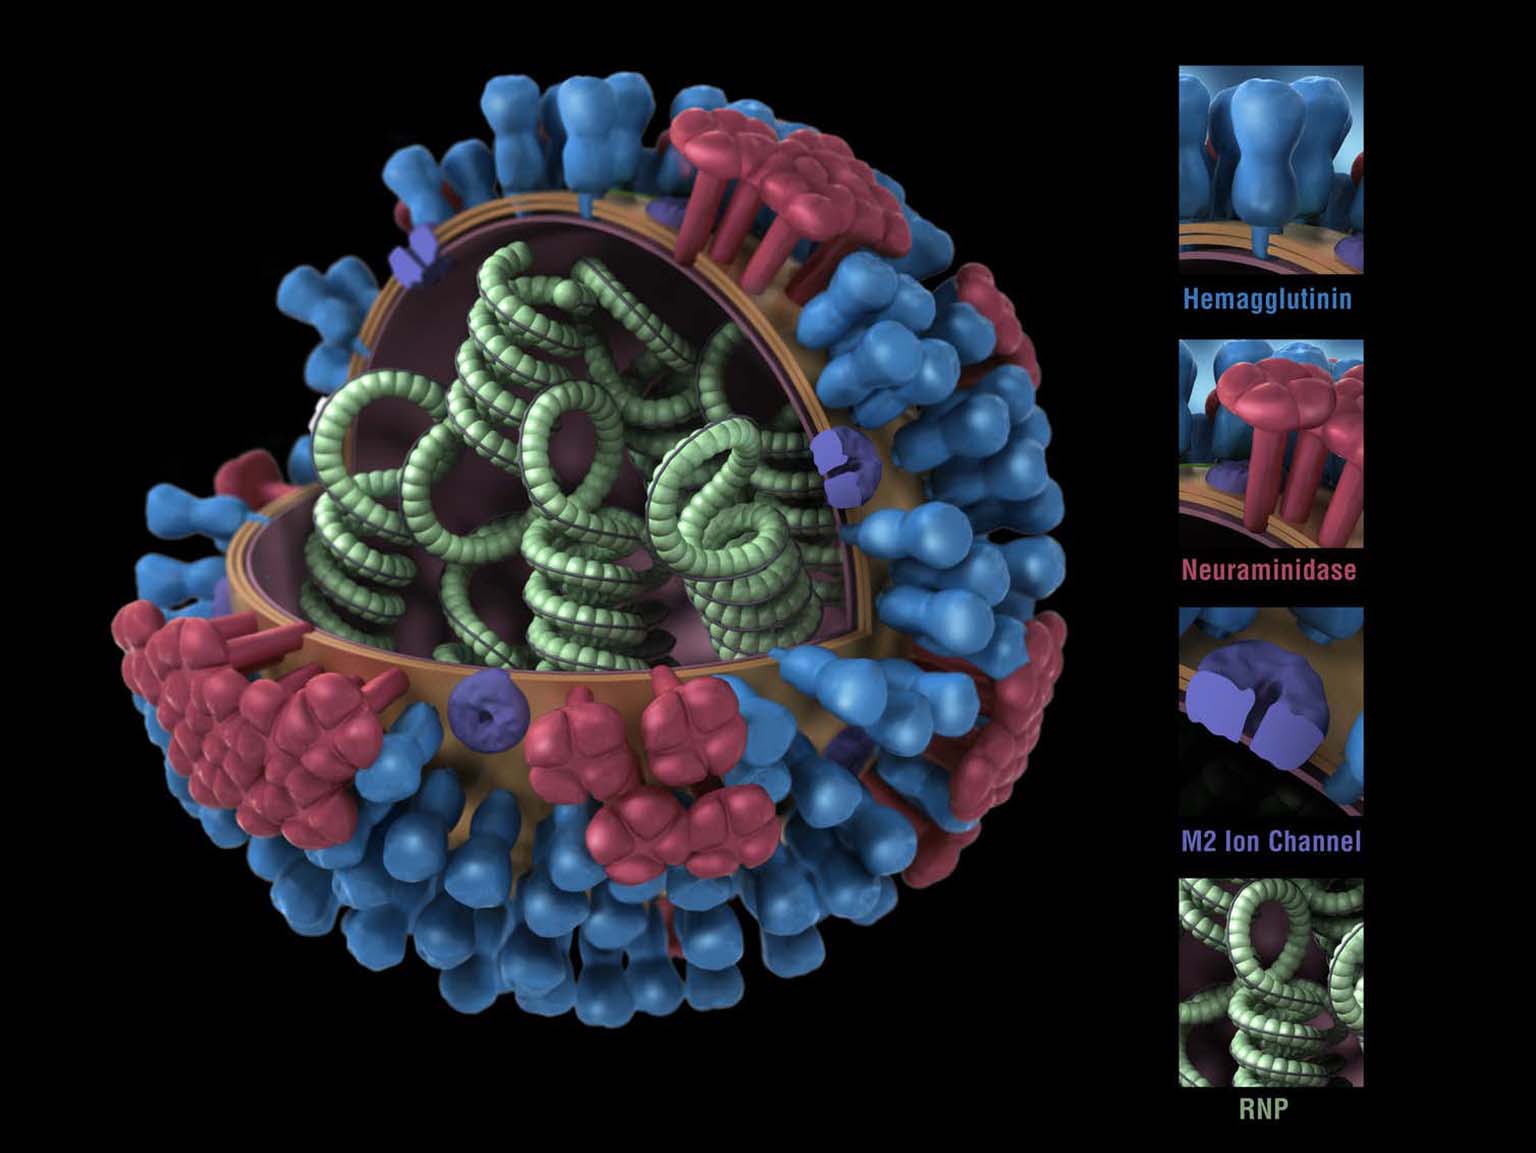 3D model of an influenza virus. Its genetic material is inside, with proteins – HA in blue, NA in red – poking out from the surface.